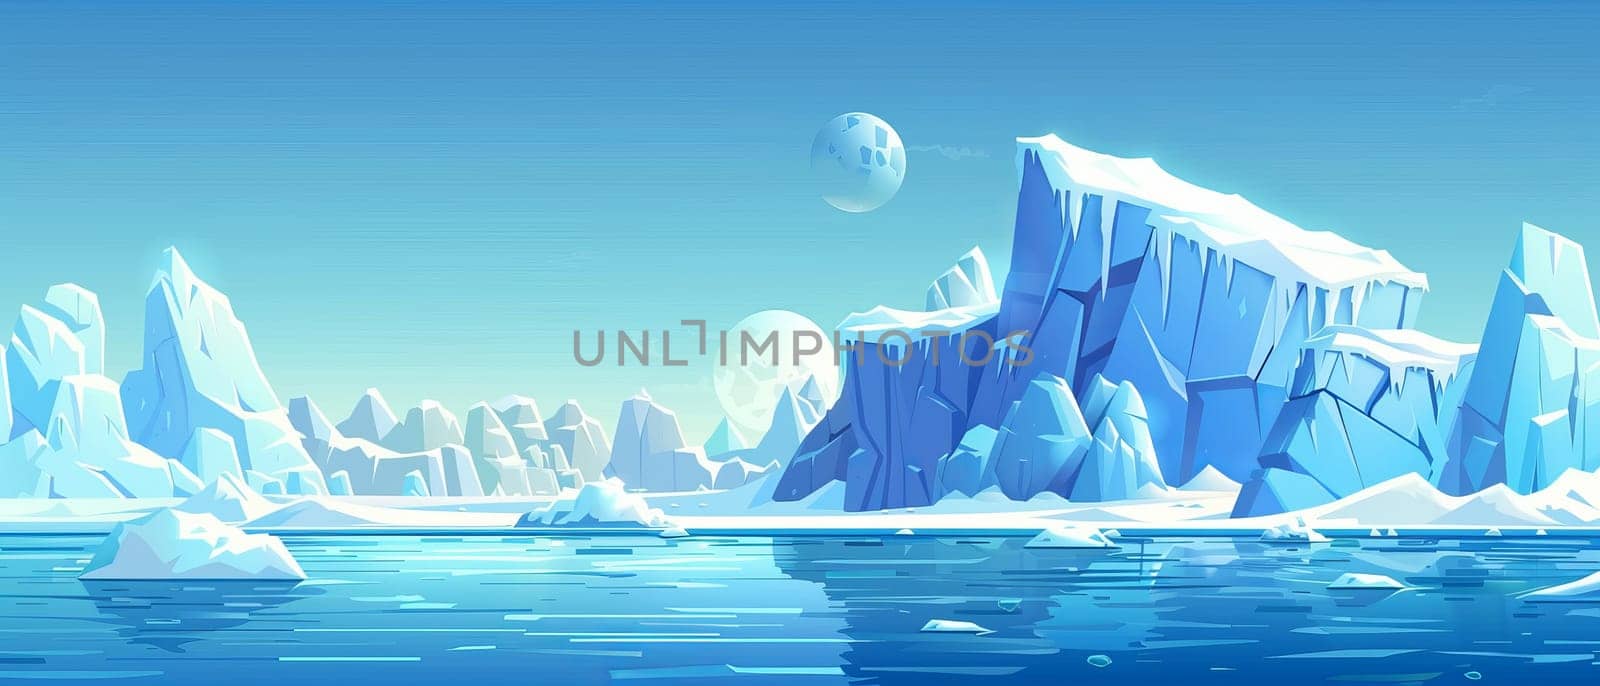 Arctic landscape with iceberg in the ocean or sea. Cartoon illustration of polar scenery with glacier snow mountains and ice blocks floating in water. Illustration of cold northern horizon with